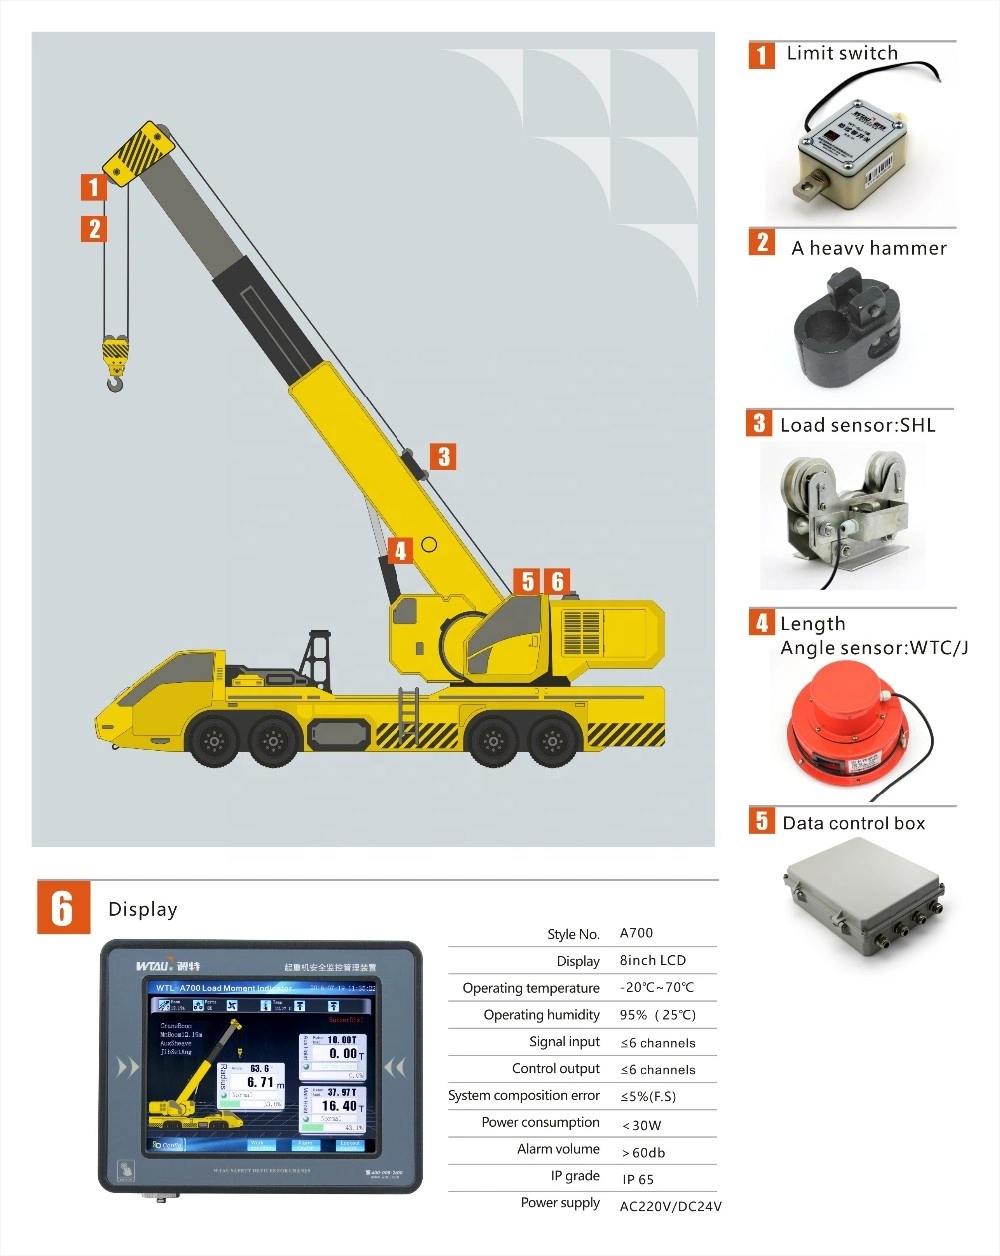 25t Tadano Crane Overload Protection Devices Wtl-A700 Load Monitoring System in Hydraulic Mobile Cranes